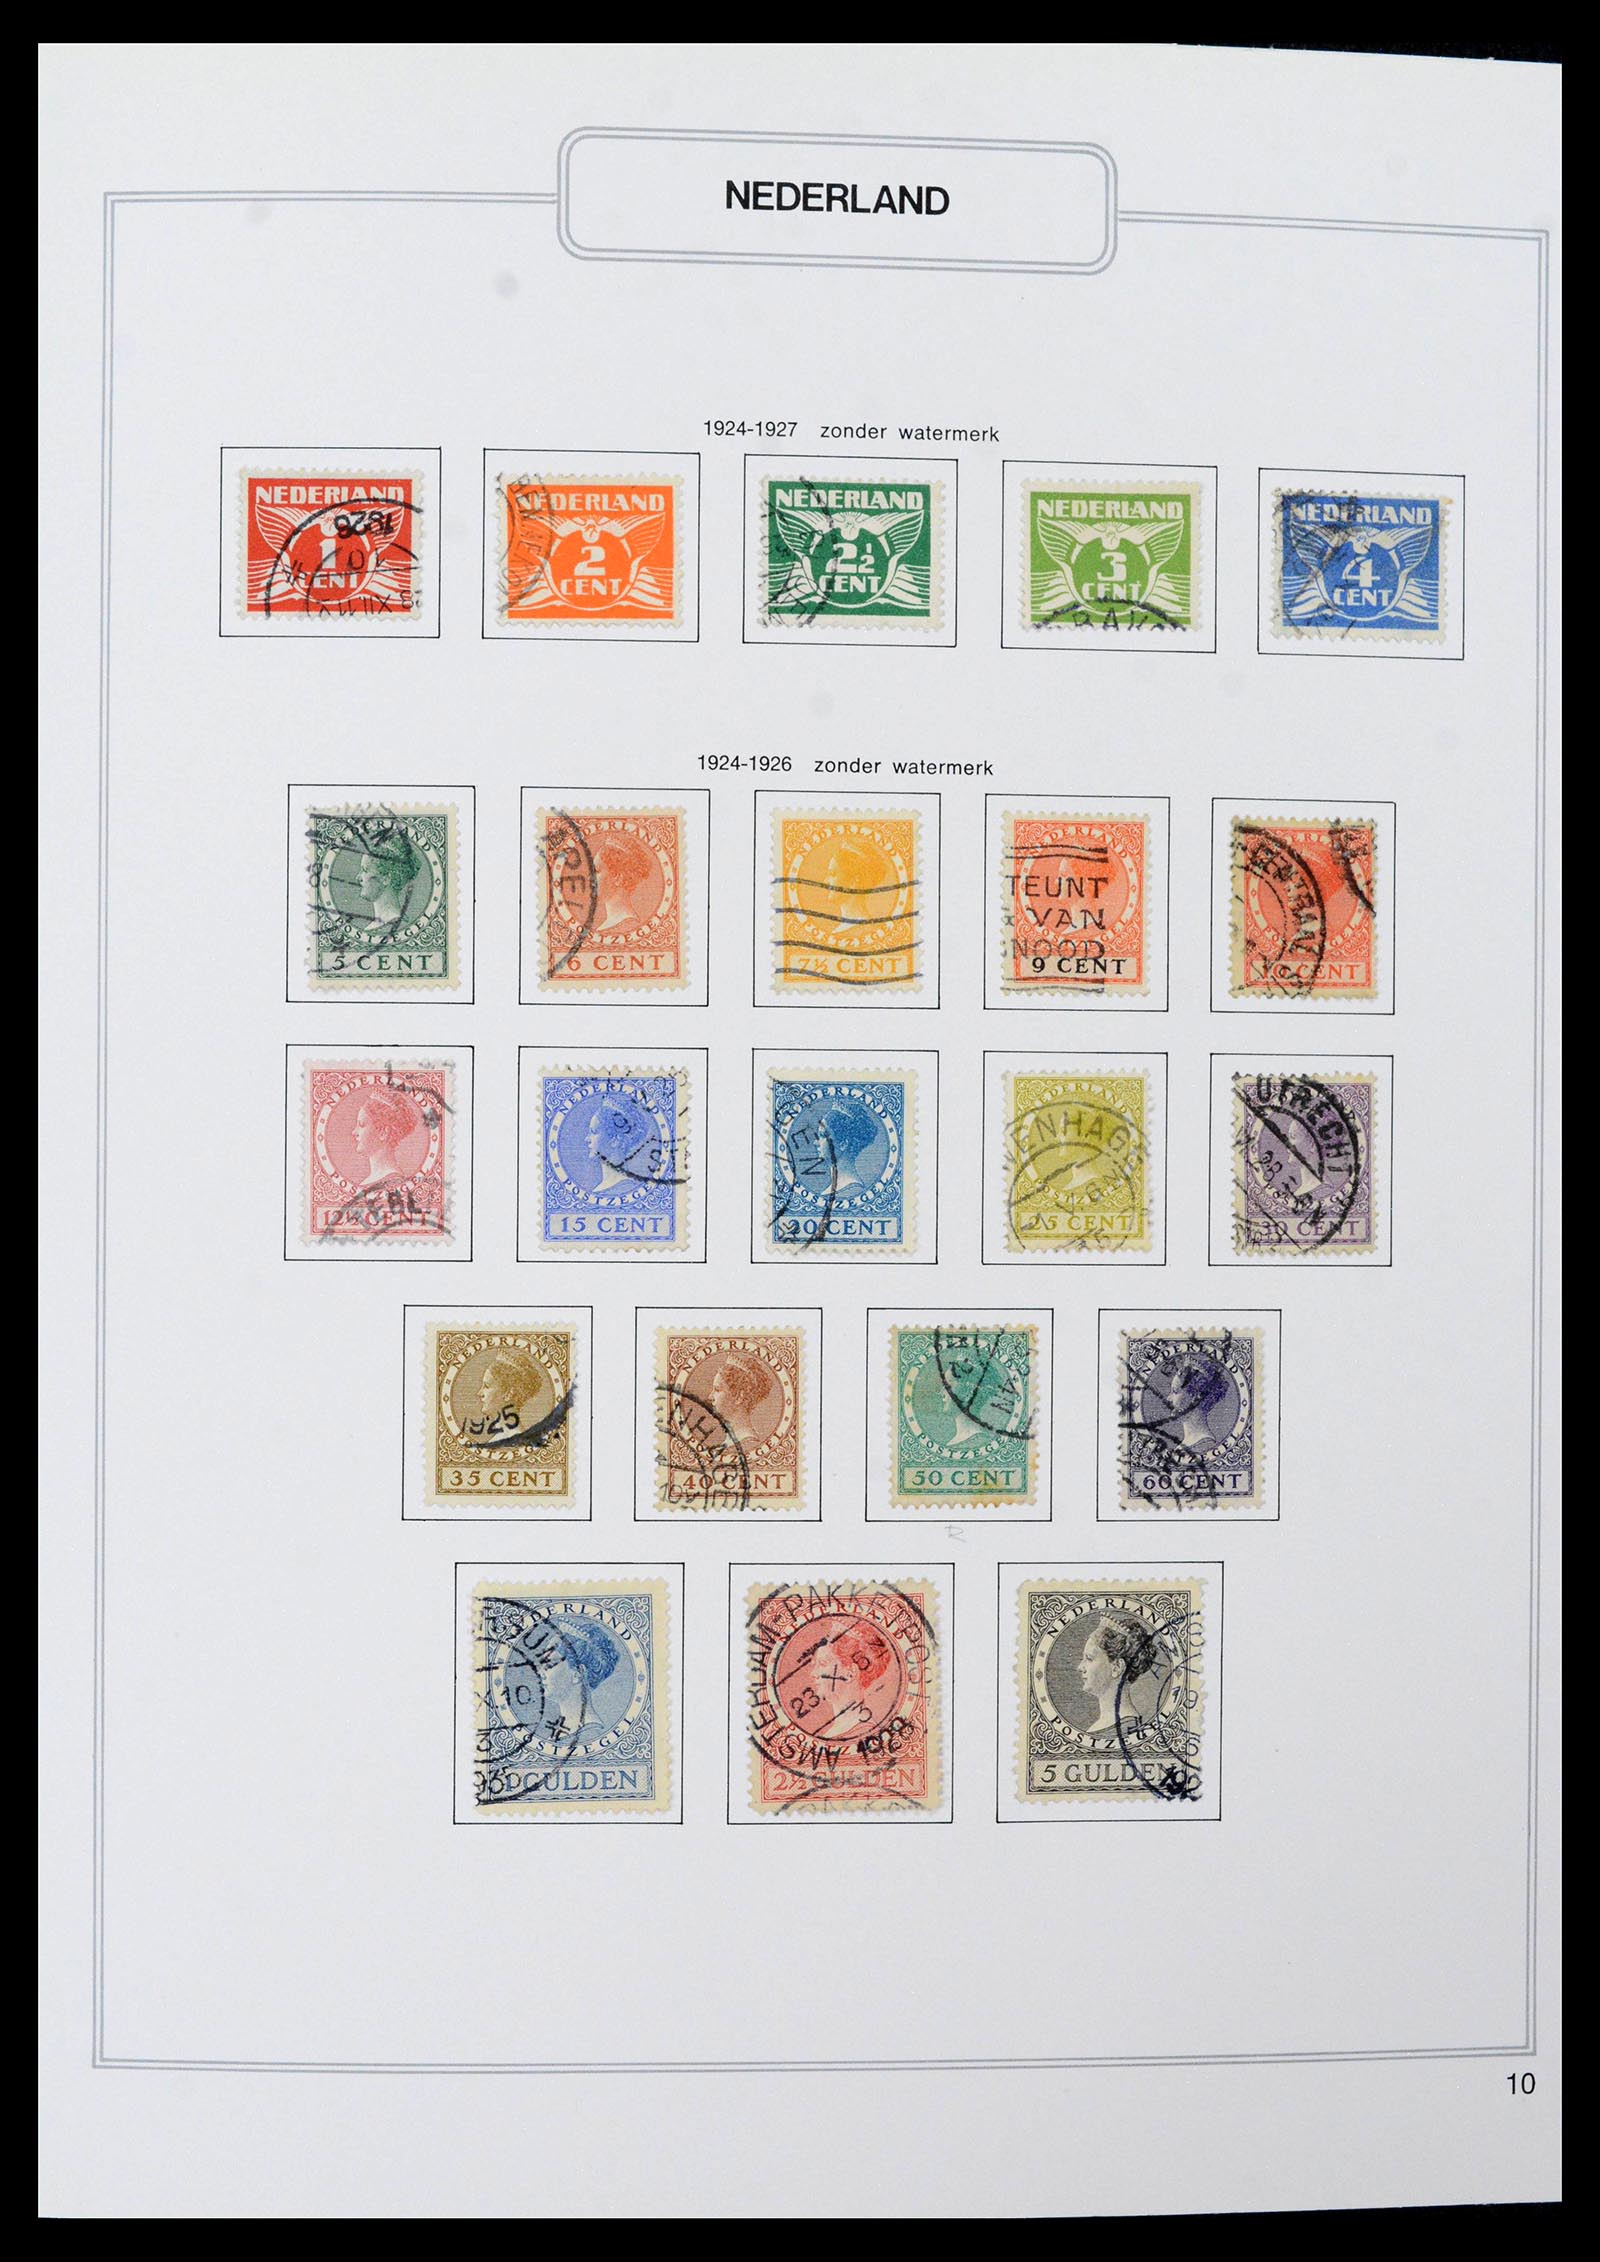 39261 0010 - Stamp collection 39261 Netherlands 1852-2015.